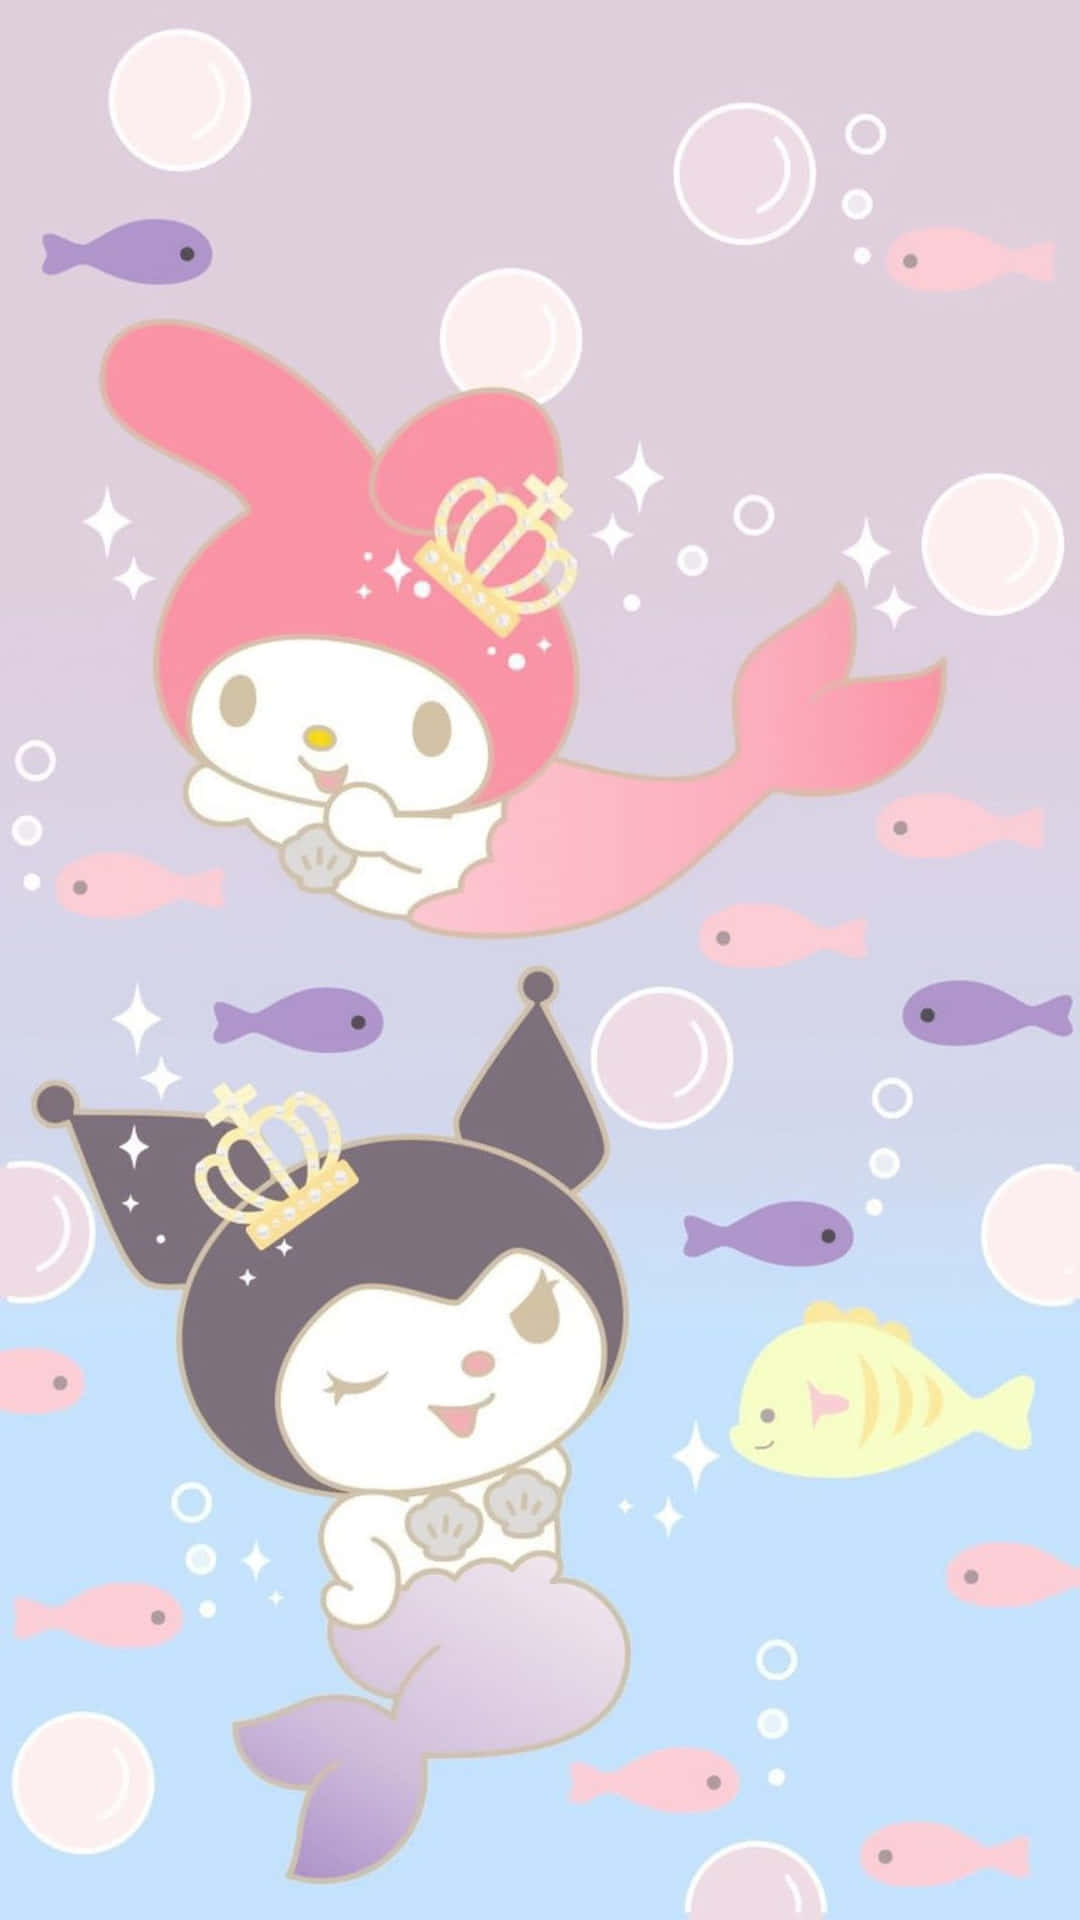 Get your hands on the trendy and stylish Kuromi Iphone today! Wallpaper